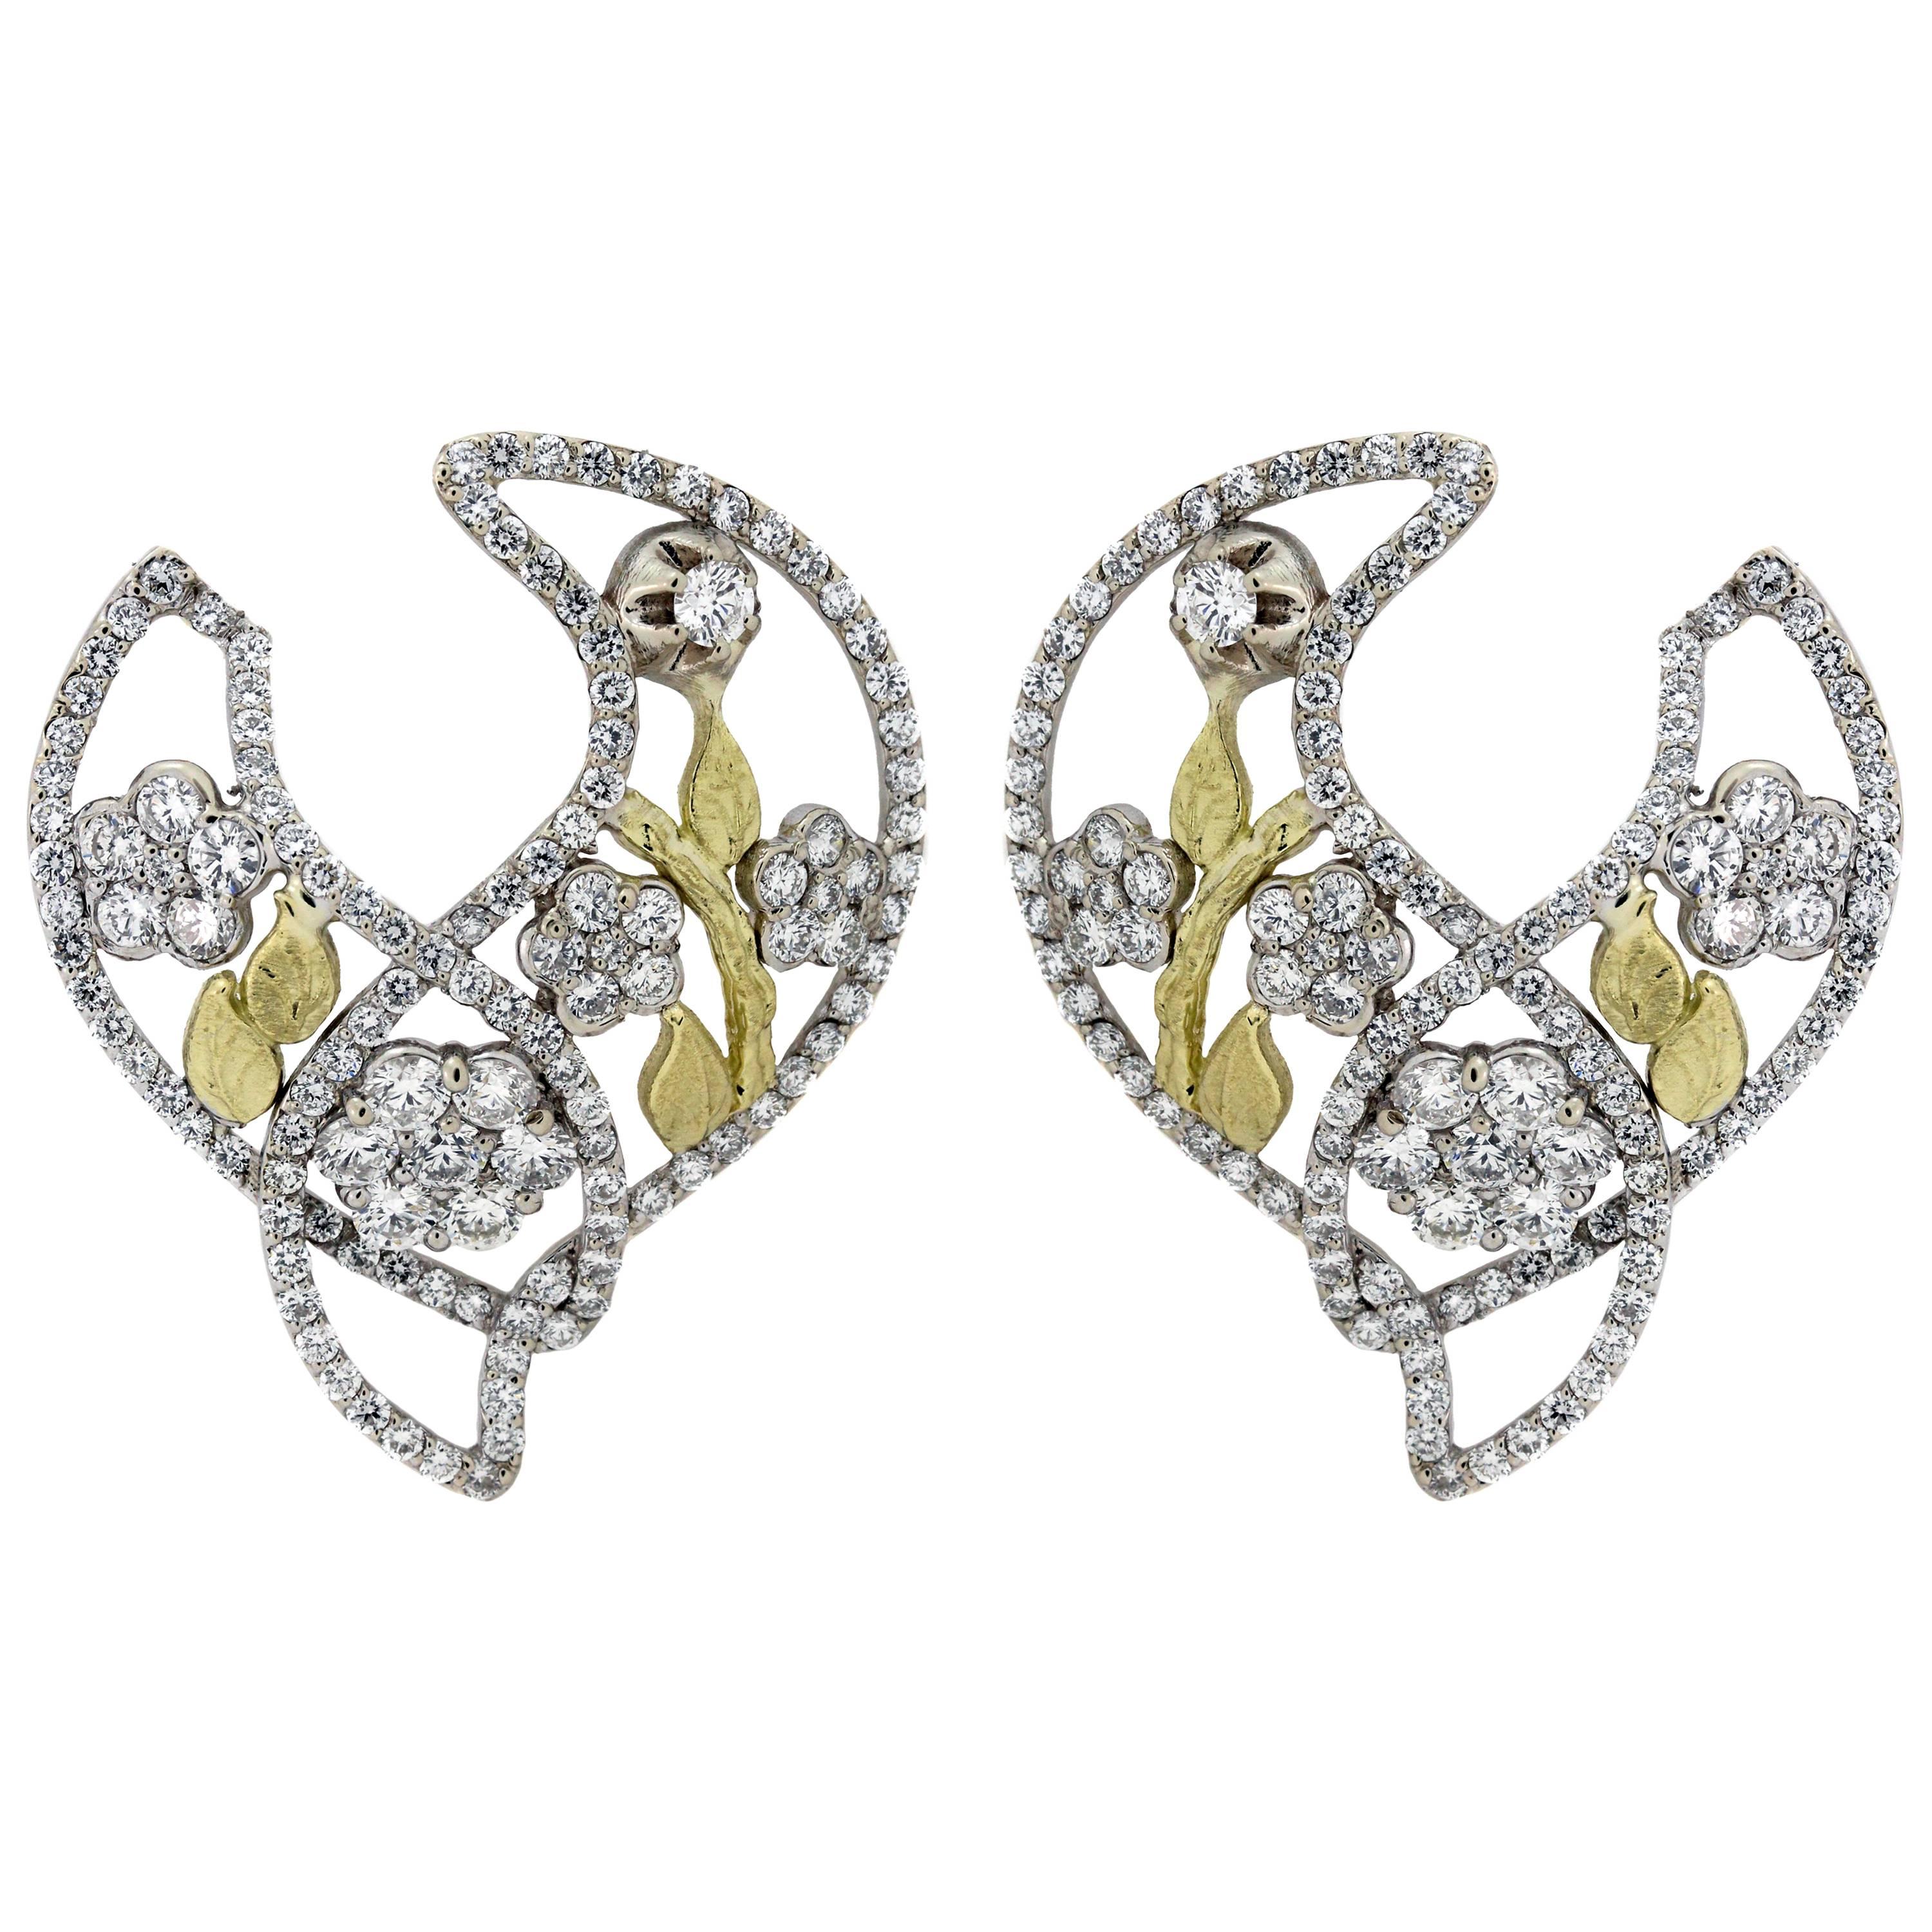 Stambolian Two-Tone Gold and Diamond Cluster Earrings